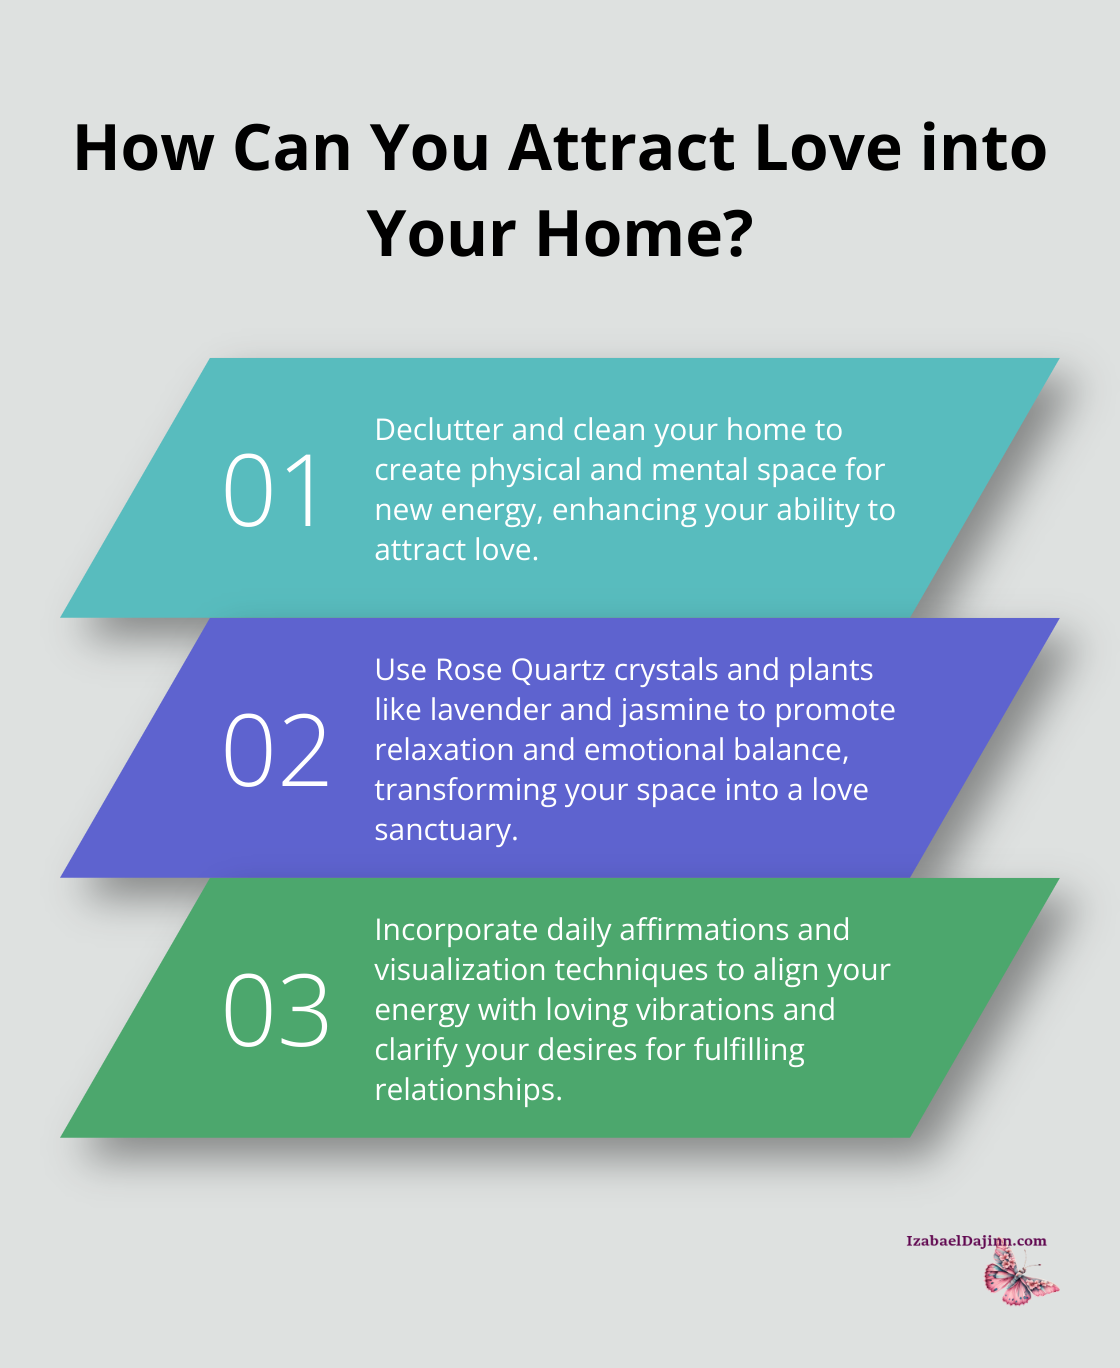 Fact - How Can You Attract Love into Your Home?